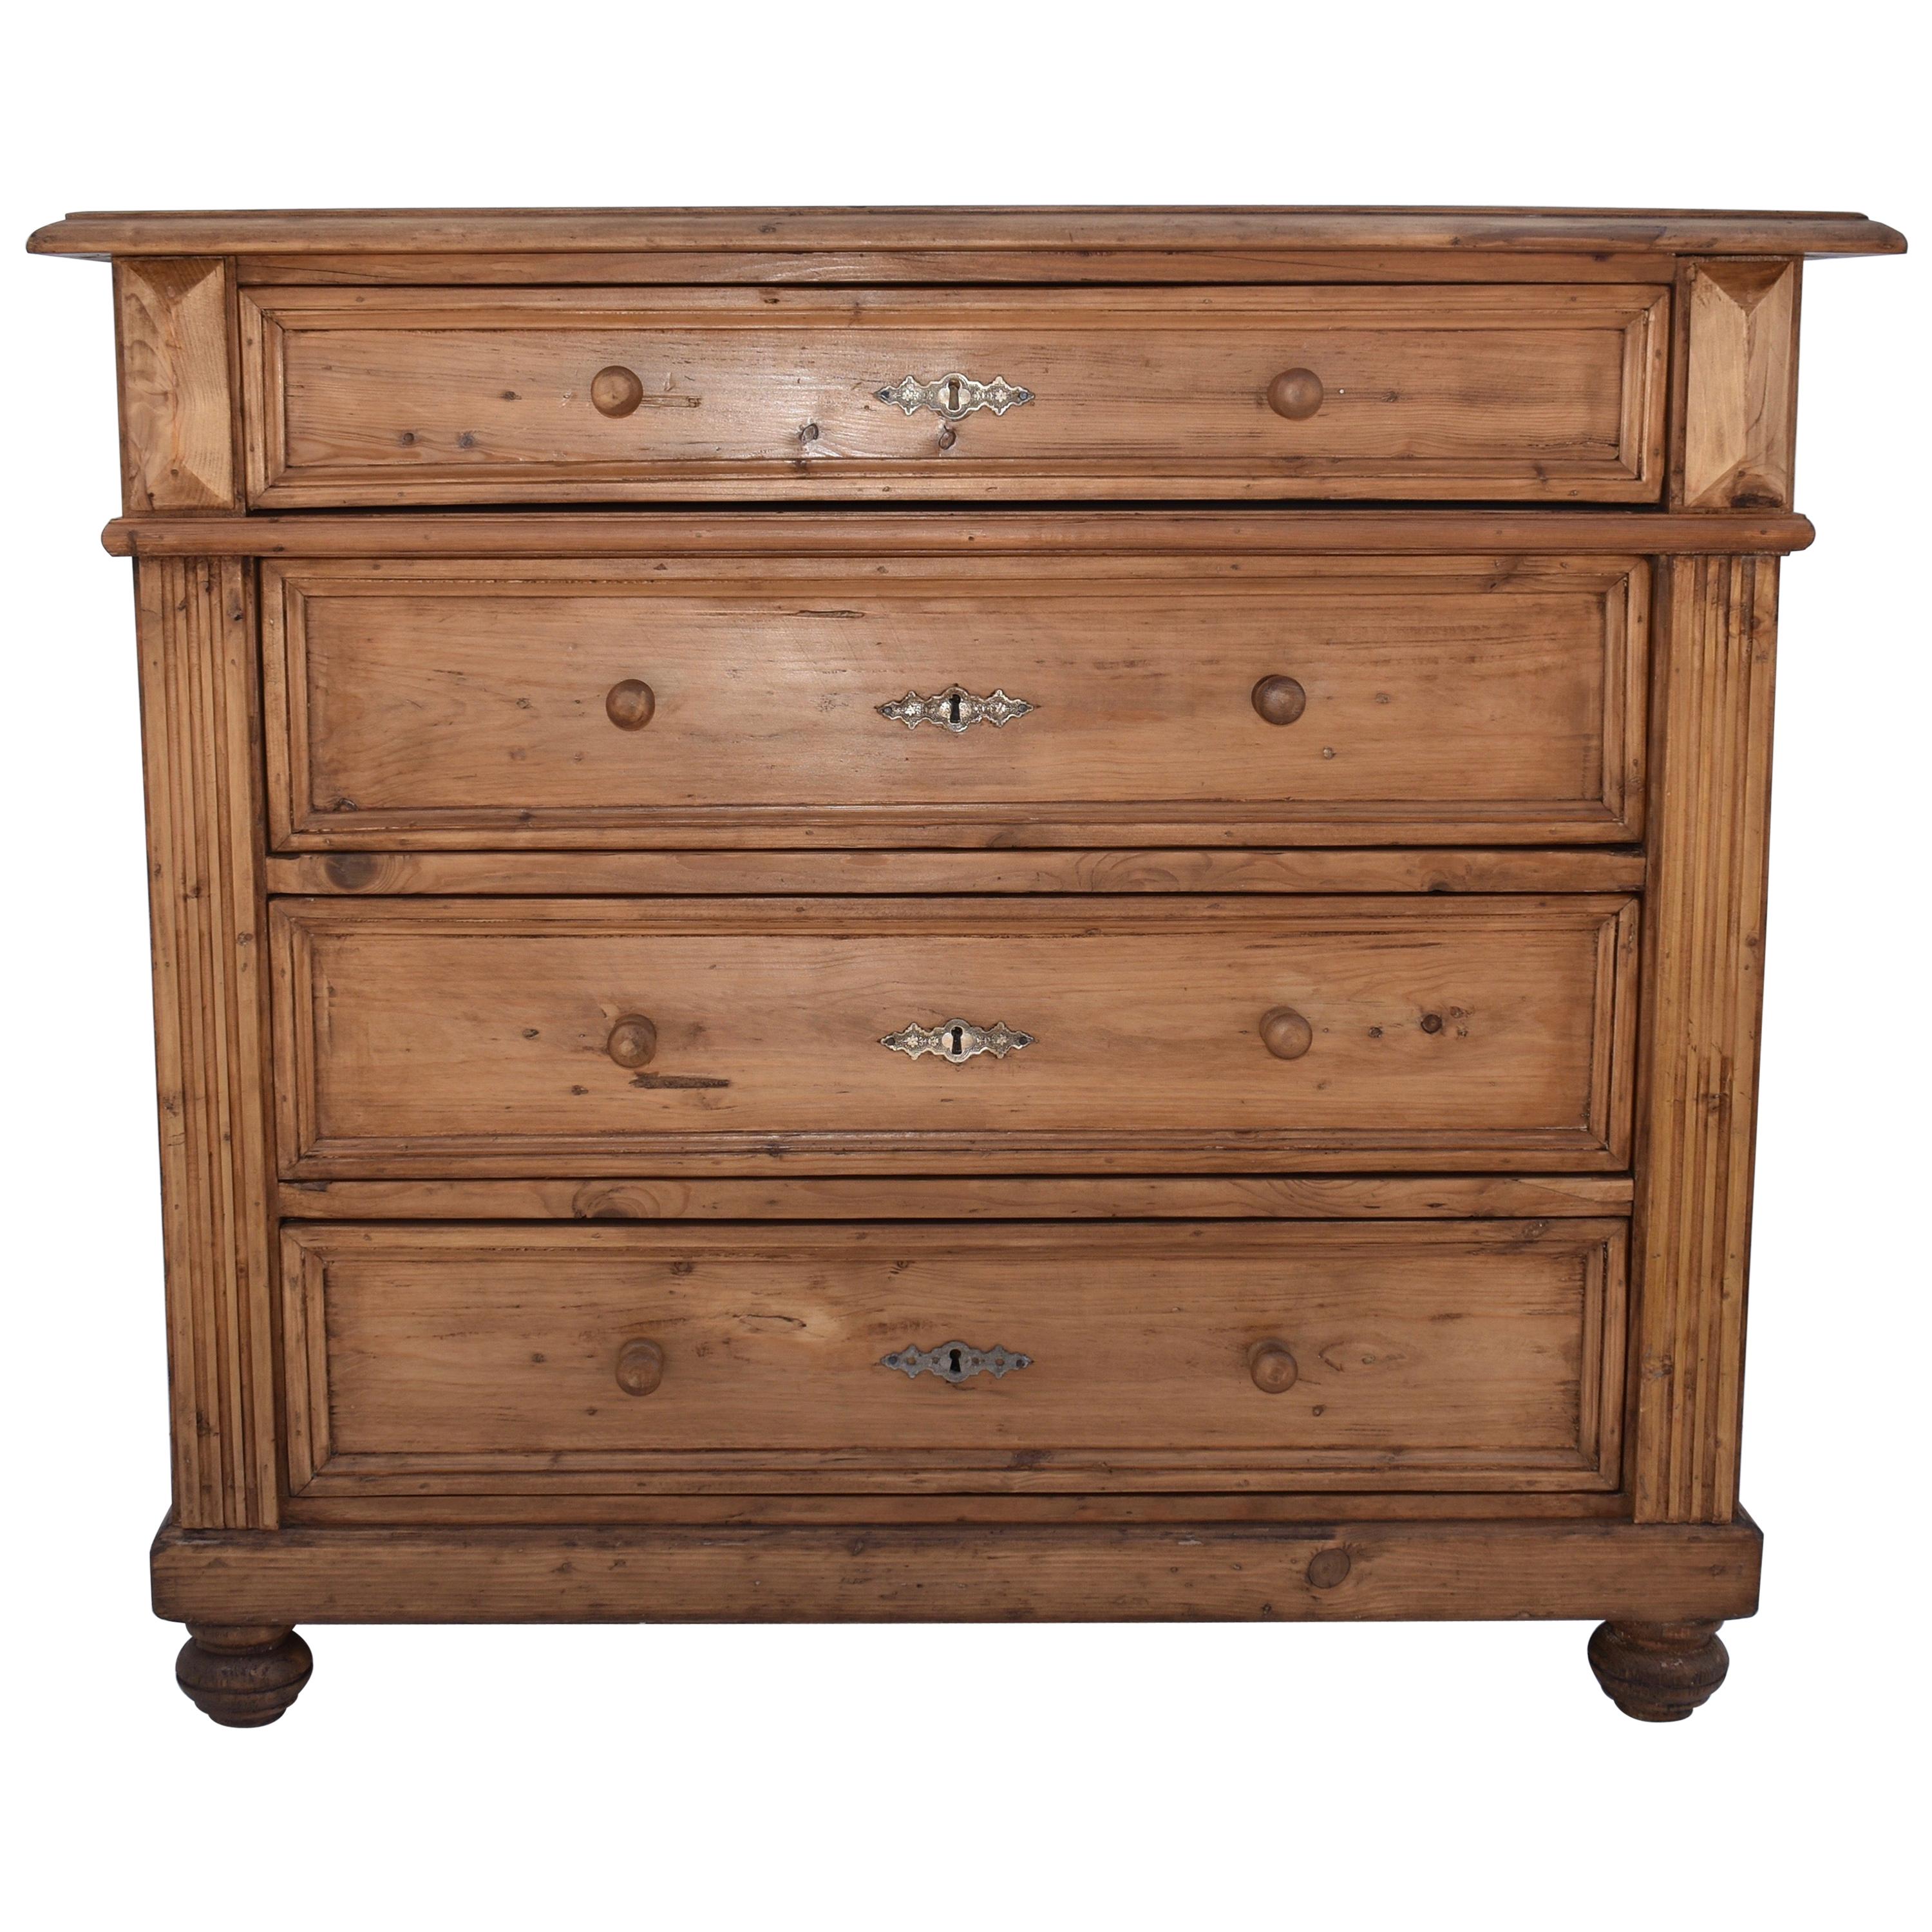 This handsome little pine chest of drawers has a step-down routed edge to the top and fluting to the front corners. The three lower drawers are equal with a shallow one on top, with a border of pine molding and zinc escutcheon plate. A great piece